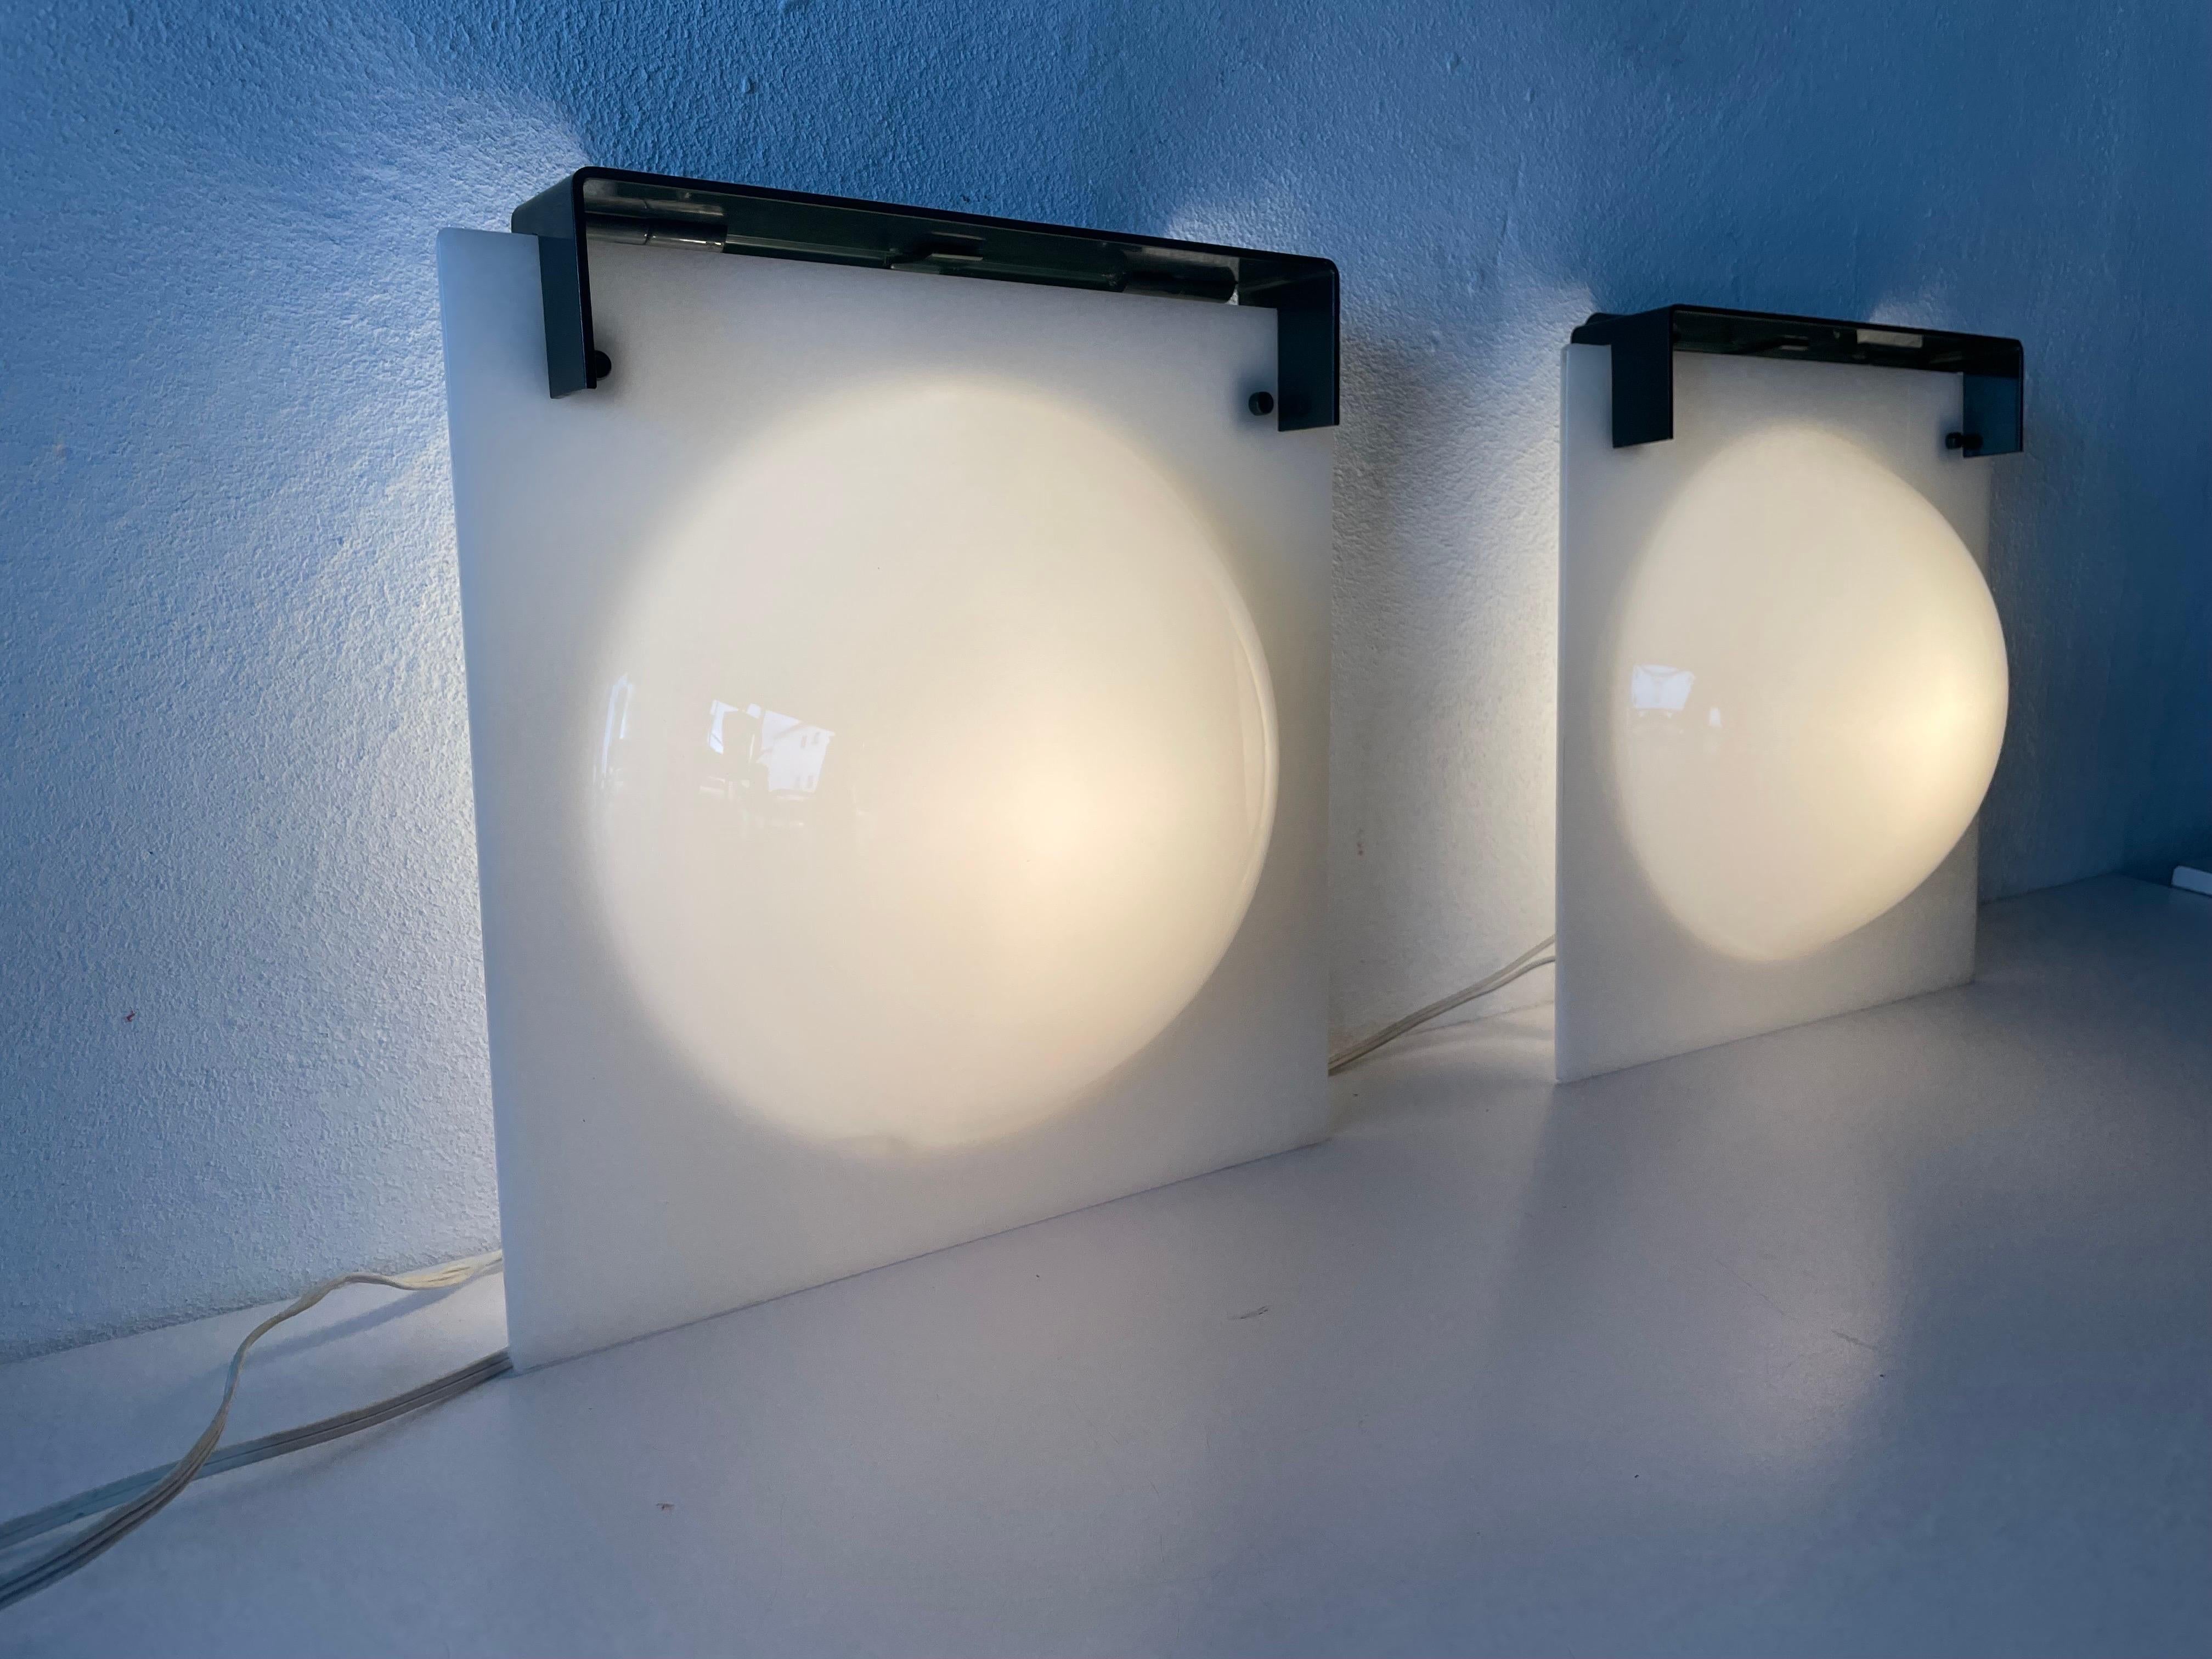 High Quality Plexiglass Bubble Design Pair of Wall Lamps, 1960s, Italy For Sale 9